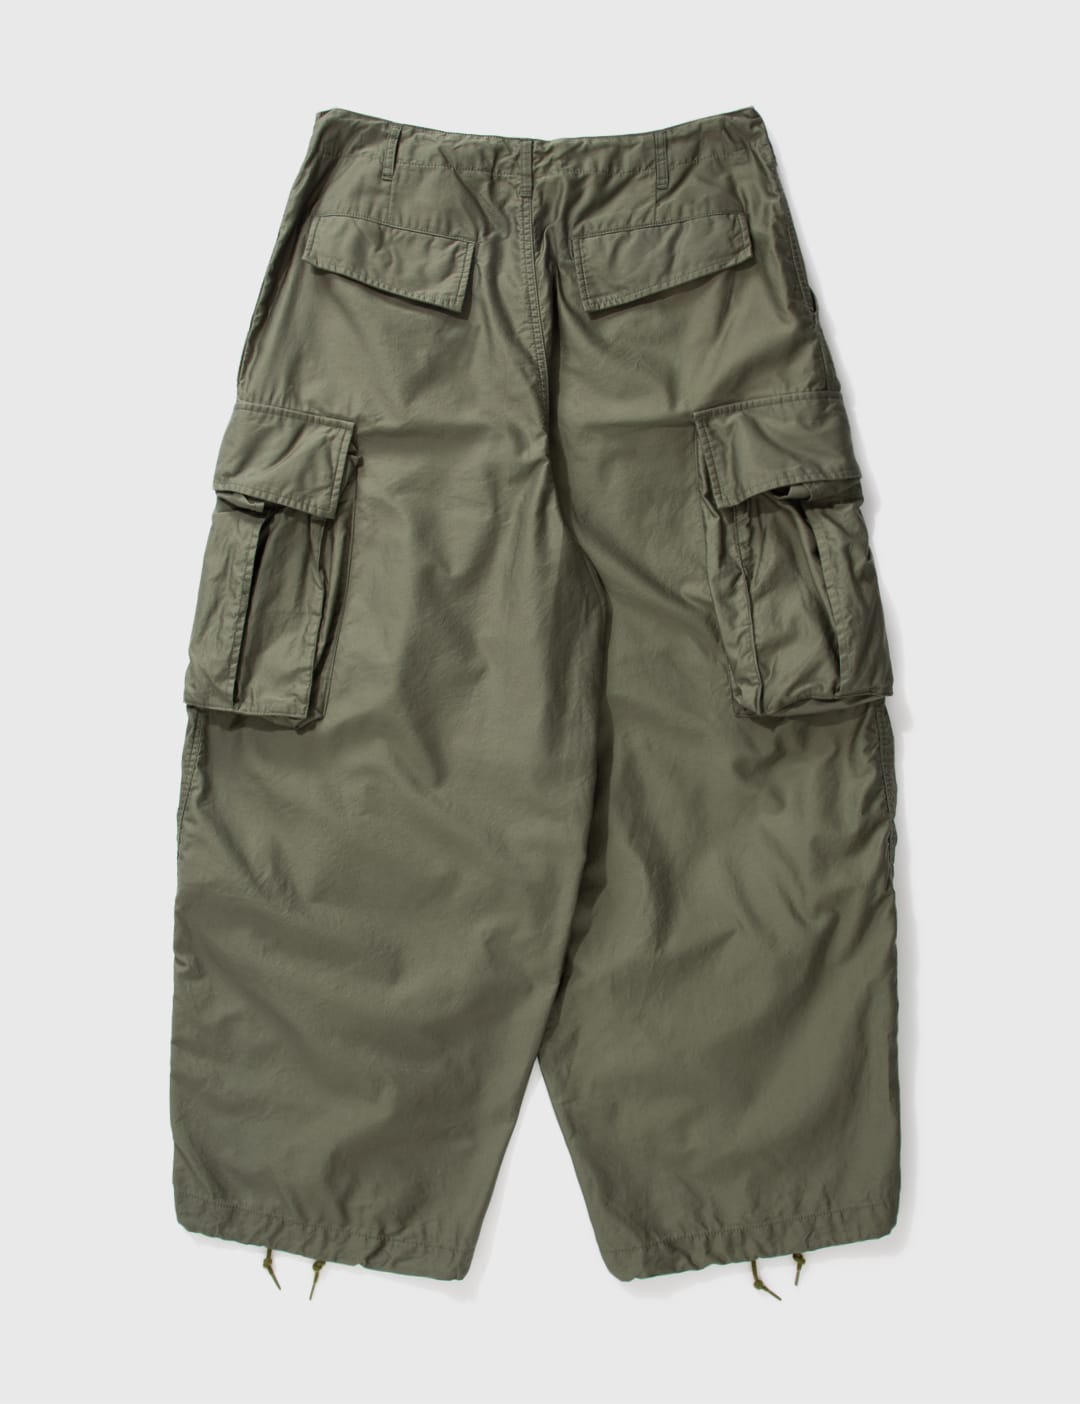 Needles - BDU H.D. Pants | HBX - Globally Curated Fashion and